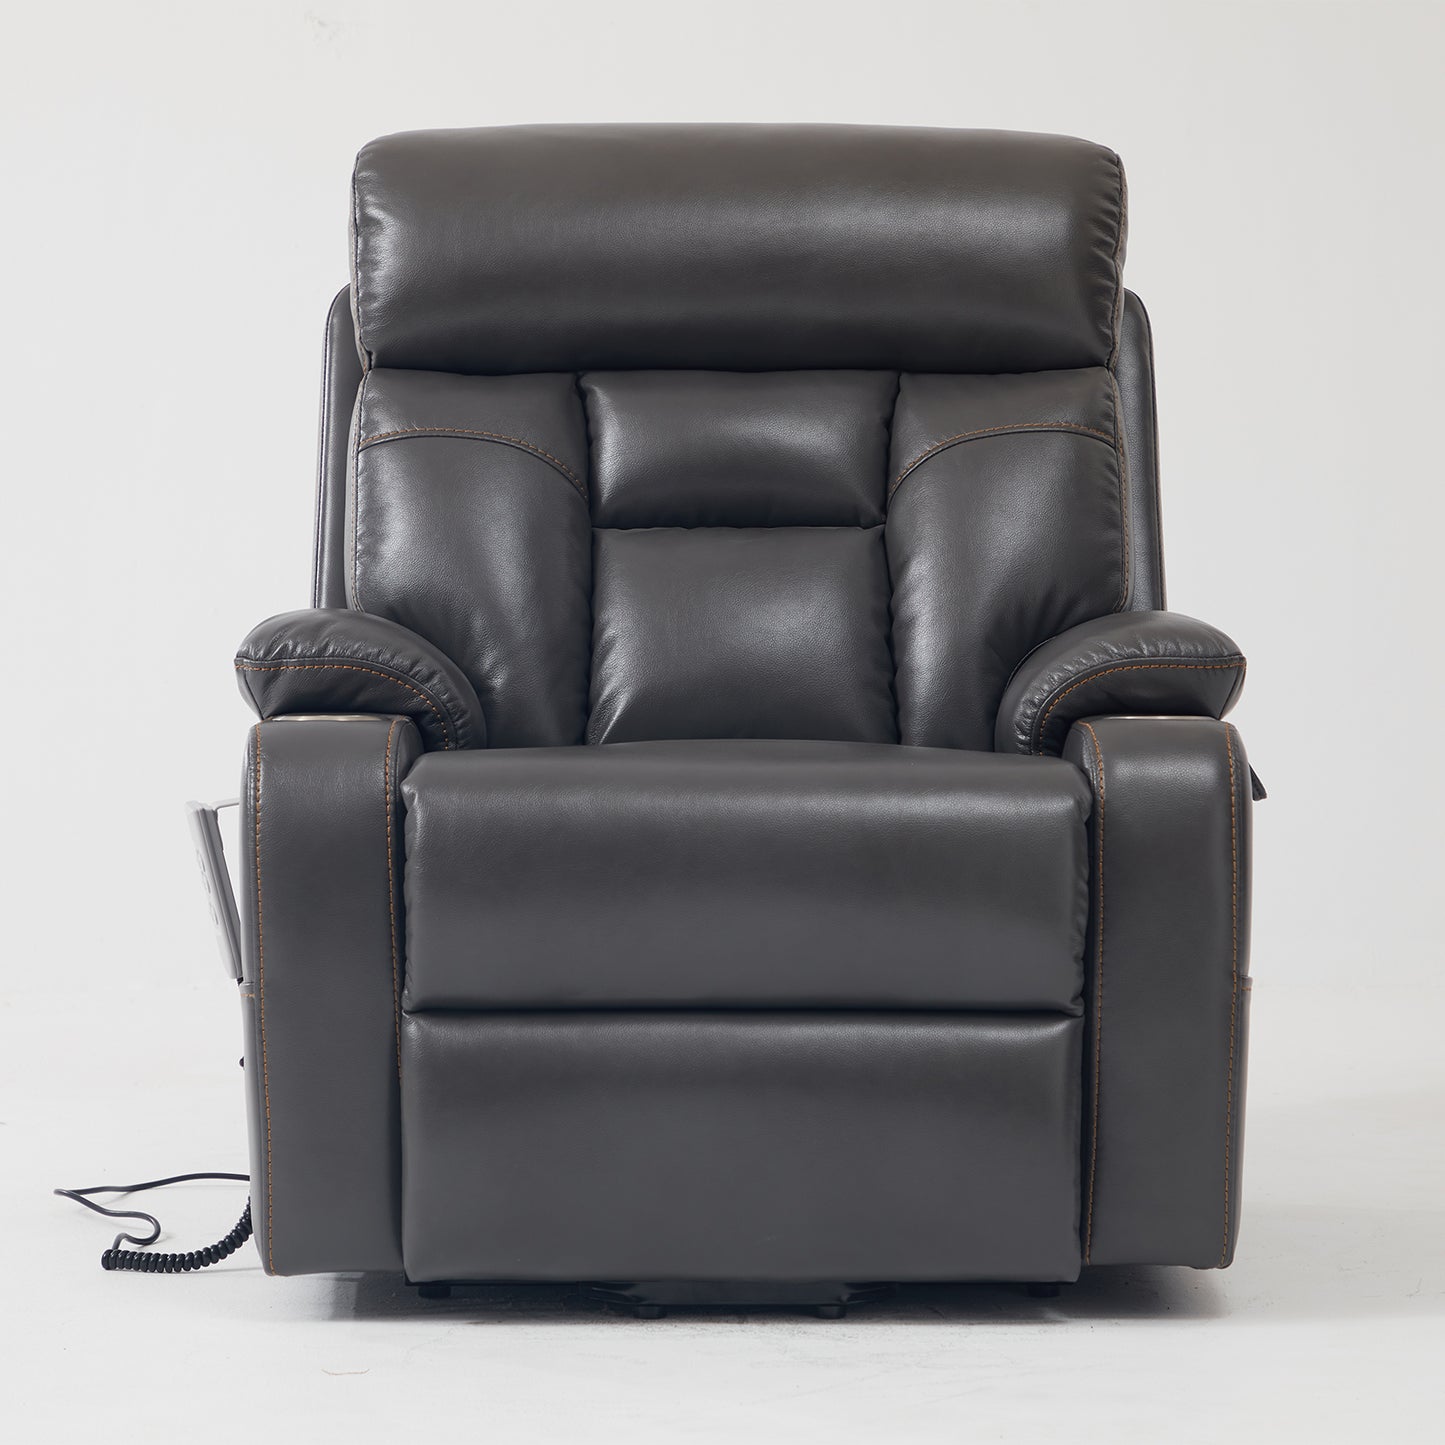 9181 Three Motor Recliner Chair With Lumbar Support(Lay Flat)